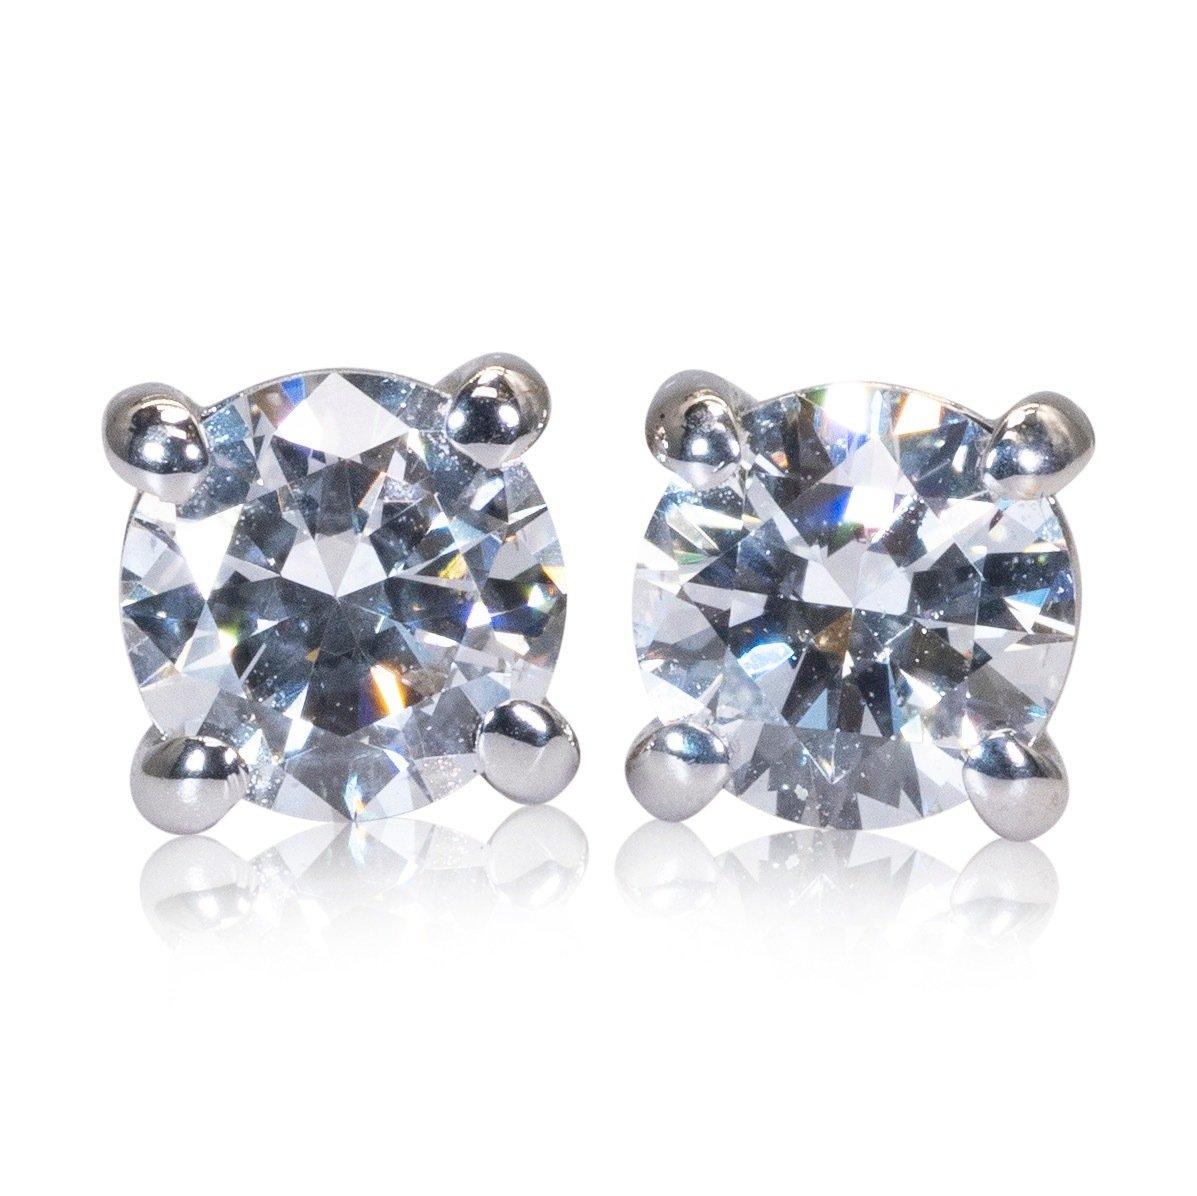 Beautiful classic stud diamond earrings made from 18k white gold with 0.61 total carat of round brilliant diamonds. This pair of earrings comes with GIA certificates and a fancy box.

-1 diamond main stone of 0.30 & 0.31 ct. each, total: 0.61